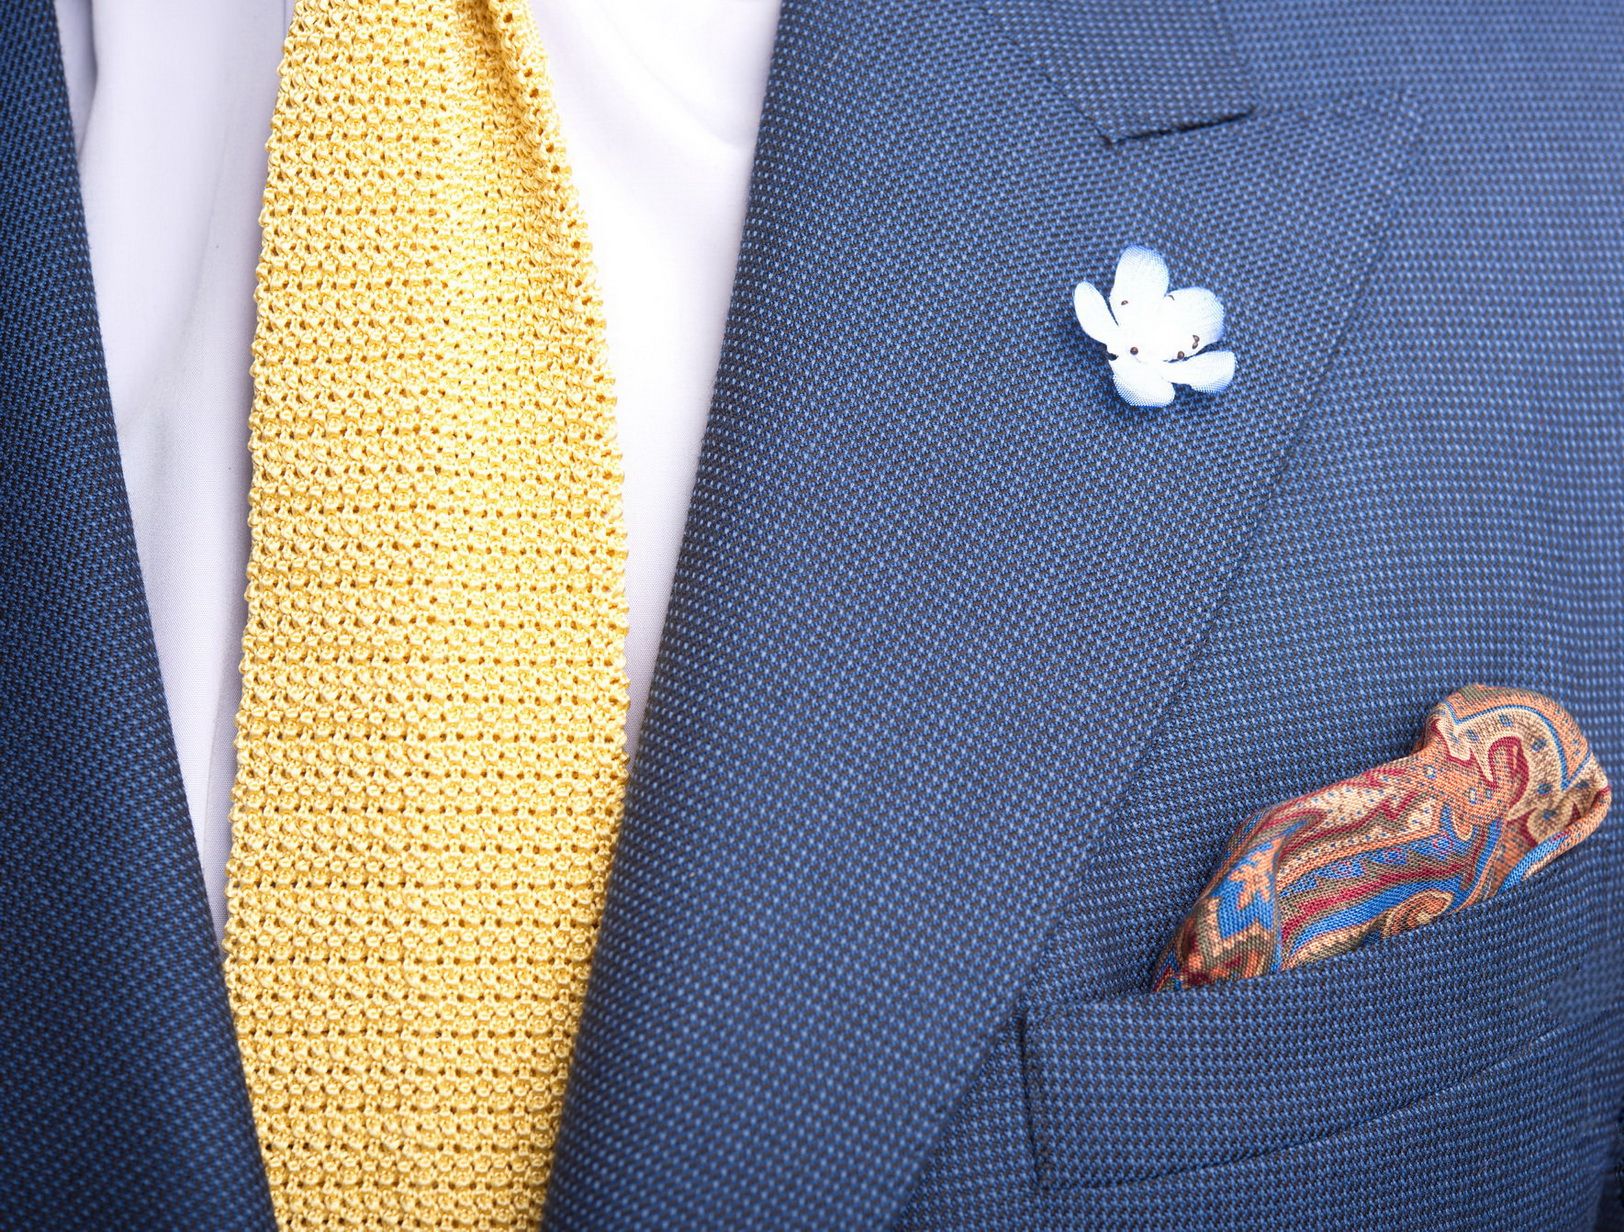 Knit Tie in Solid Pale Yellow Silk - Fort Belvedere